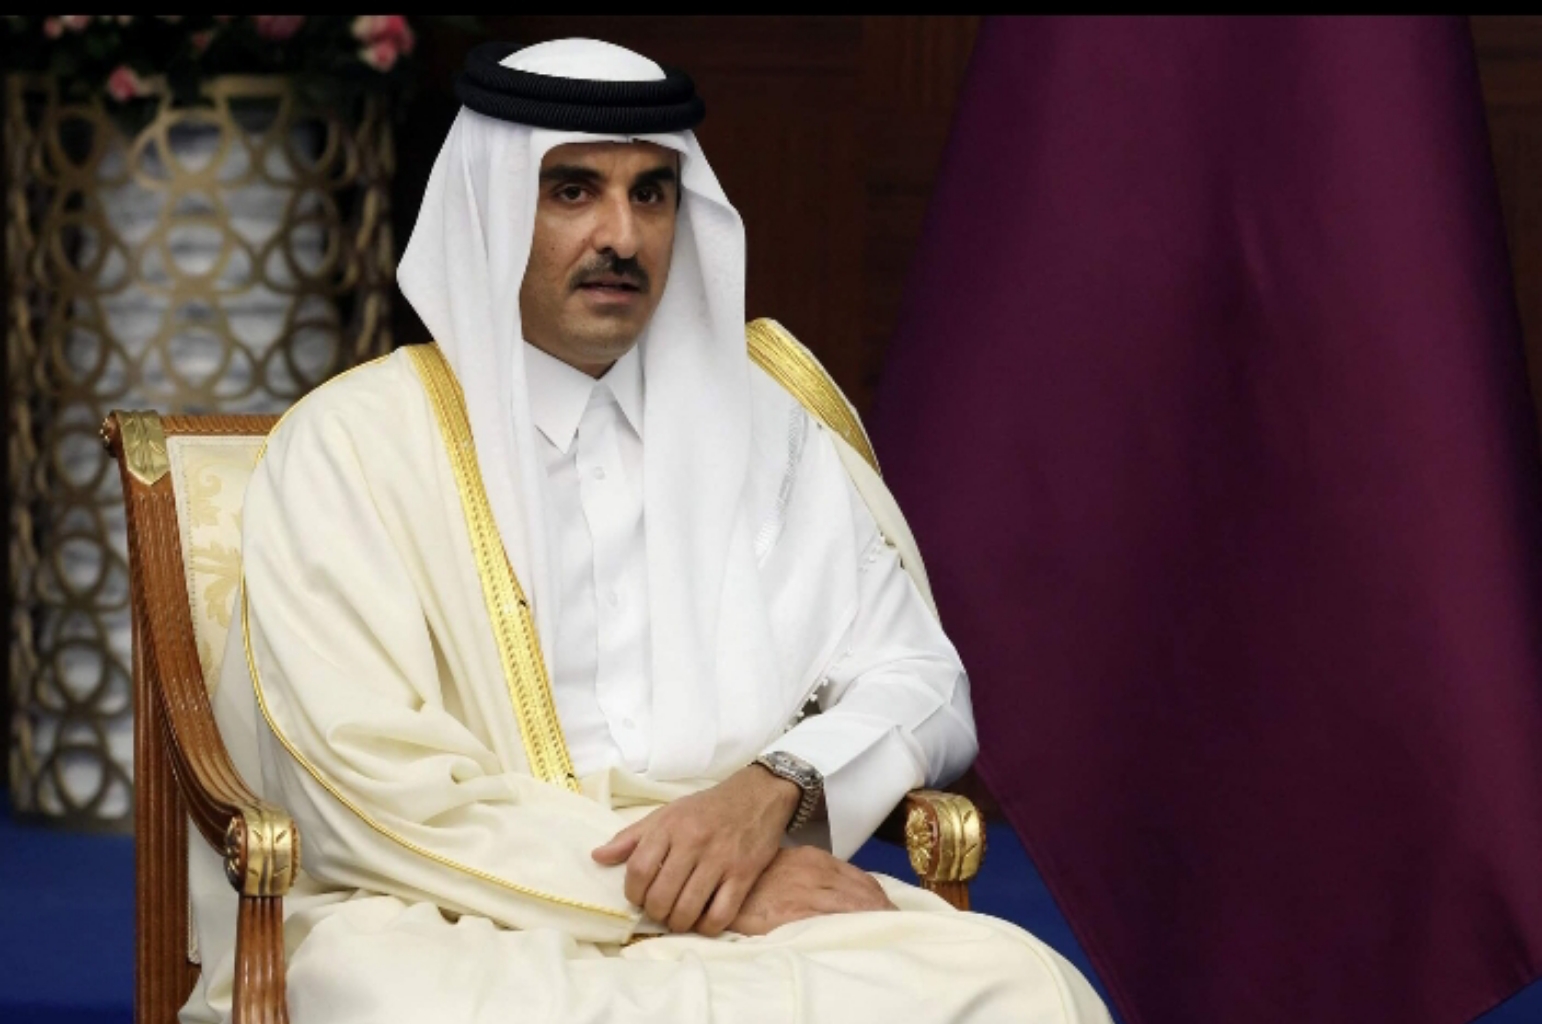 QATAR’S ABSOLUTE RULER ON WORLD STAGE WITH WORLD CUP HOSTING